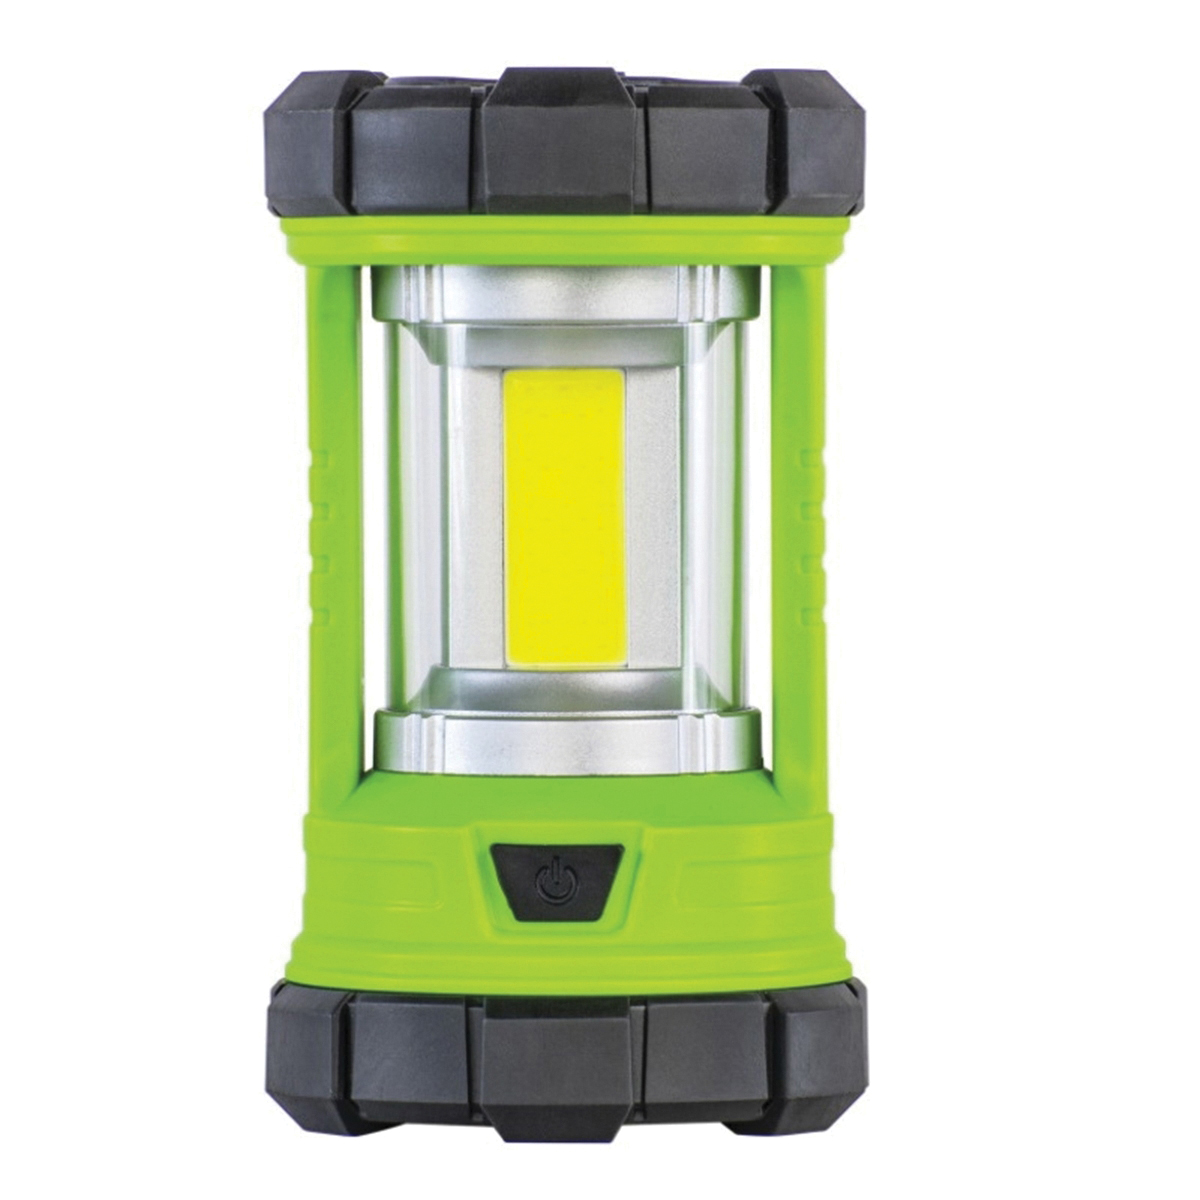 lifegear-41-3992-lantern-and-power-bank-lithium-ion-rechargeable-battery-clear